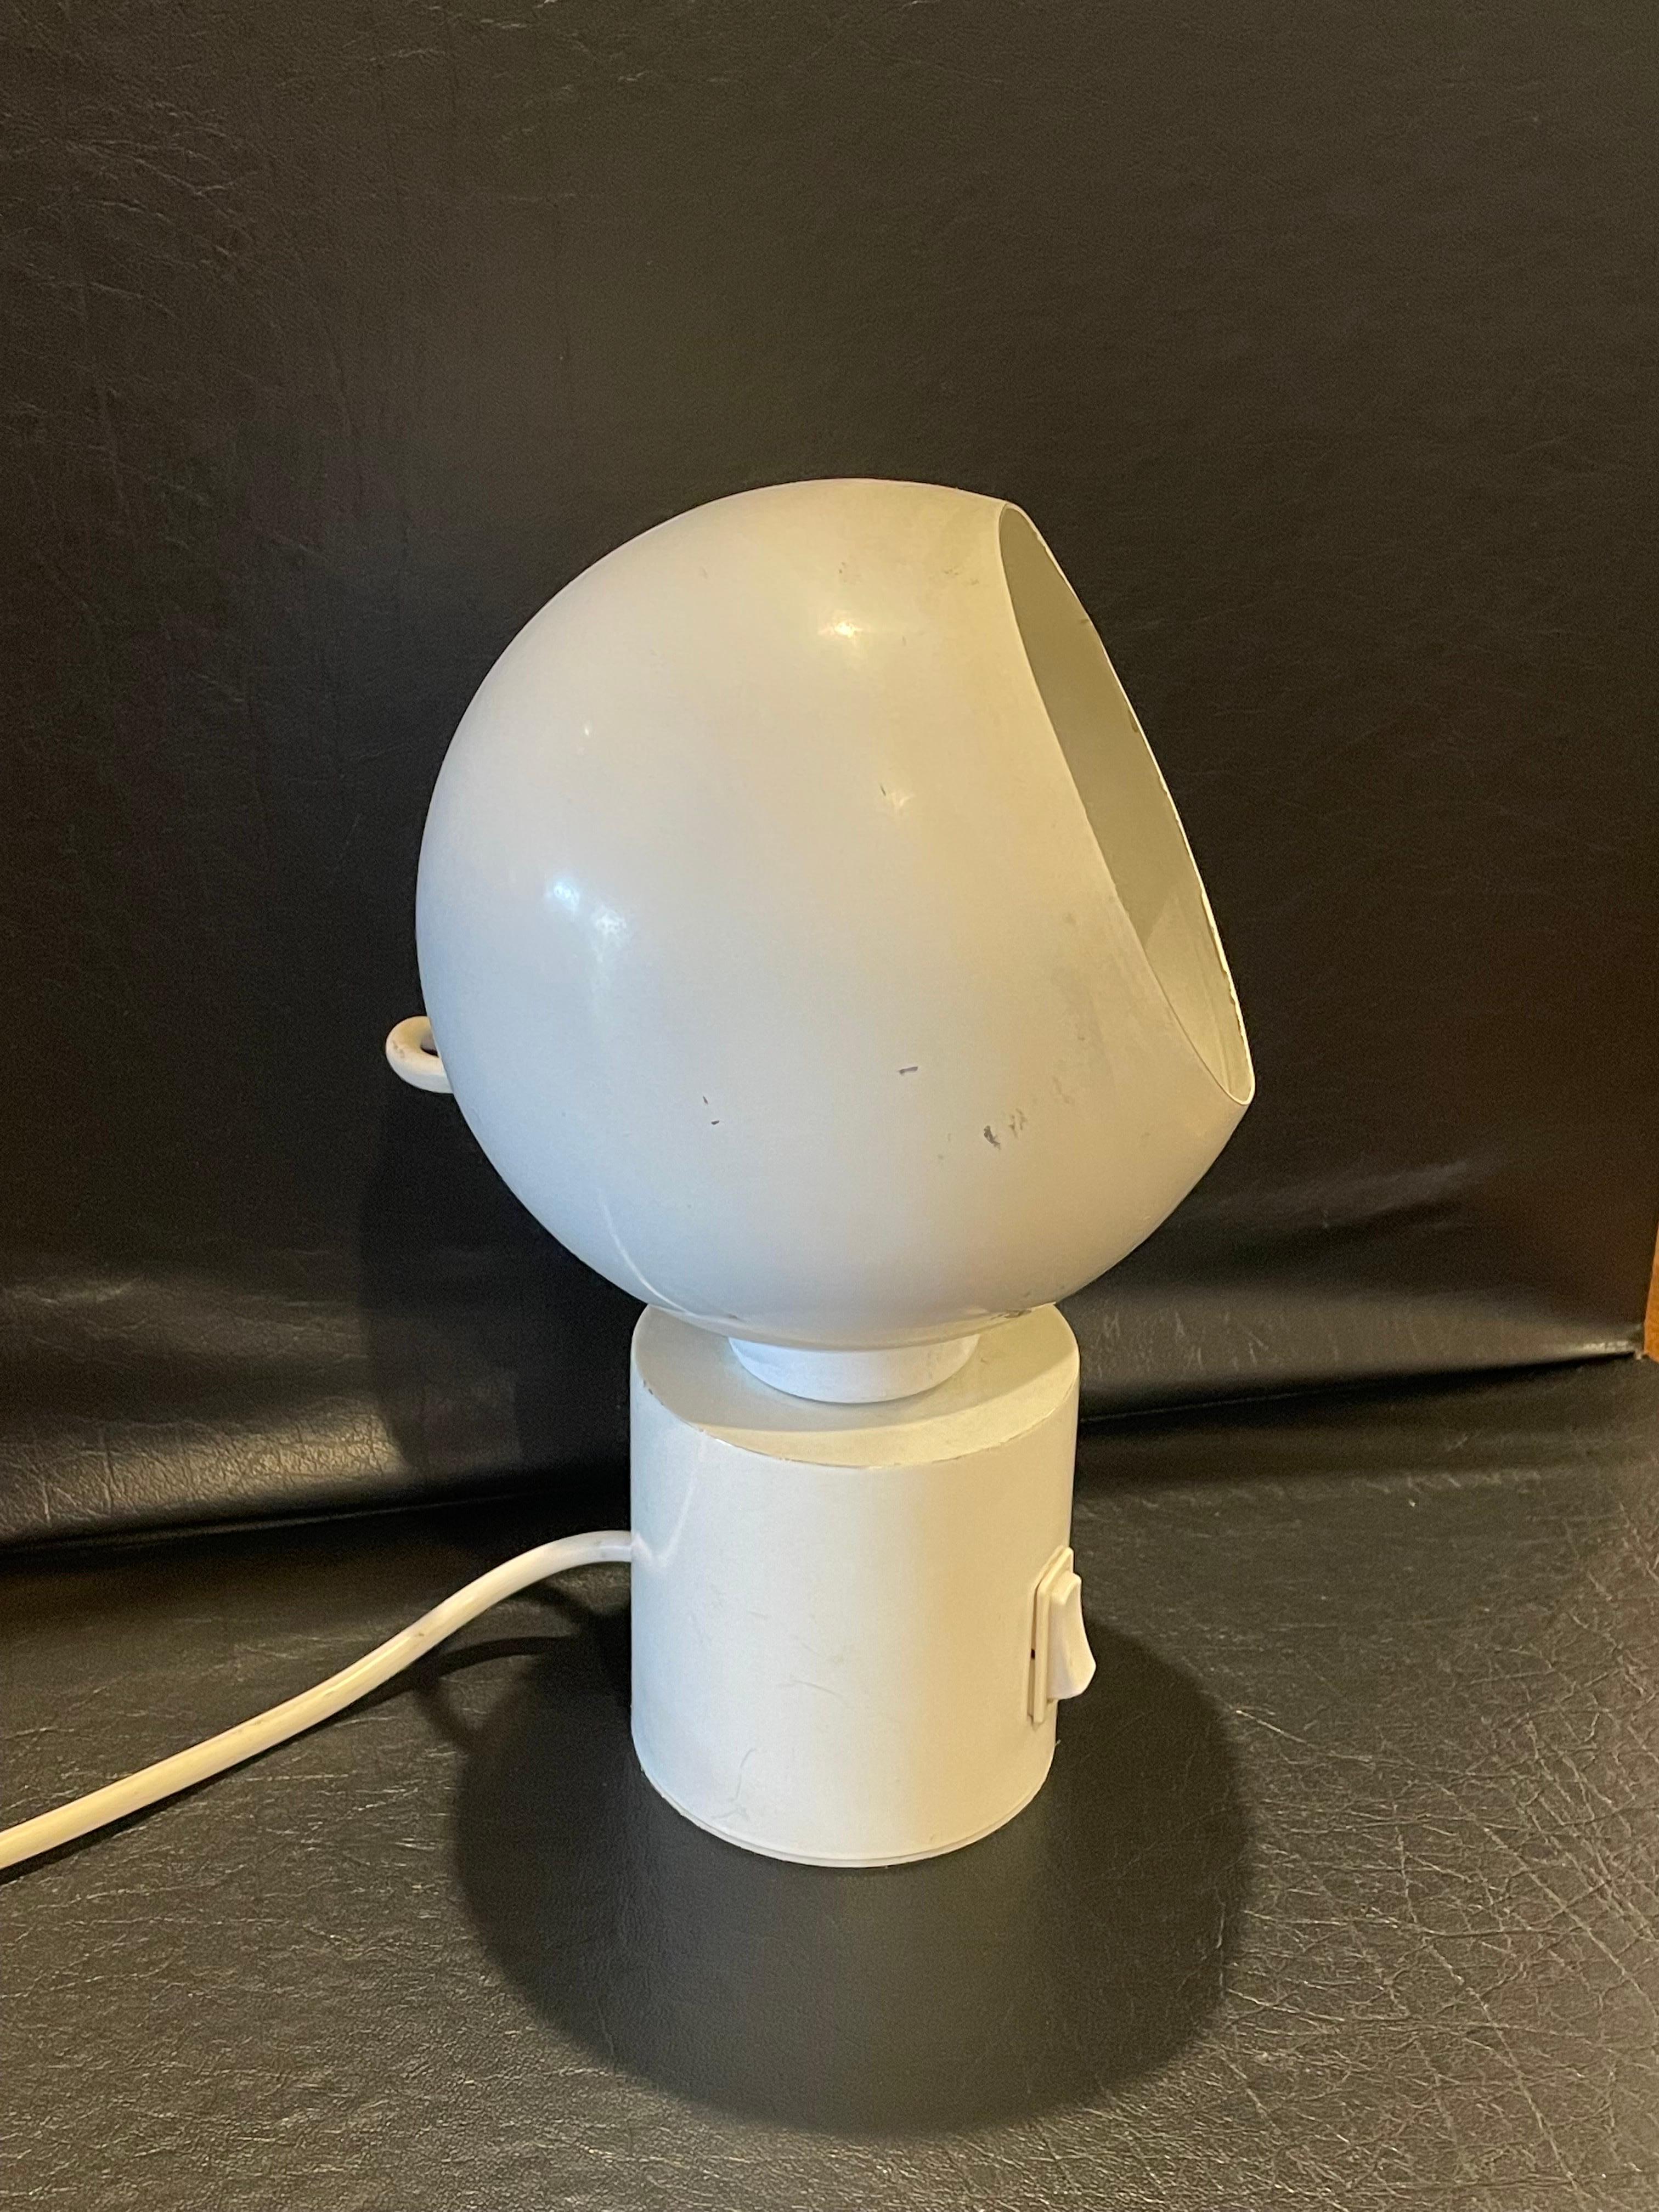 Cool Space-age table lamp circa 1970s in white enameled finish perfectly working condition the base it's magnetic and you can drill it to a wall and move it into any position you want.